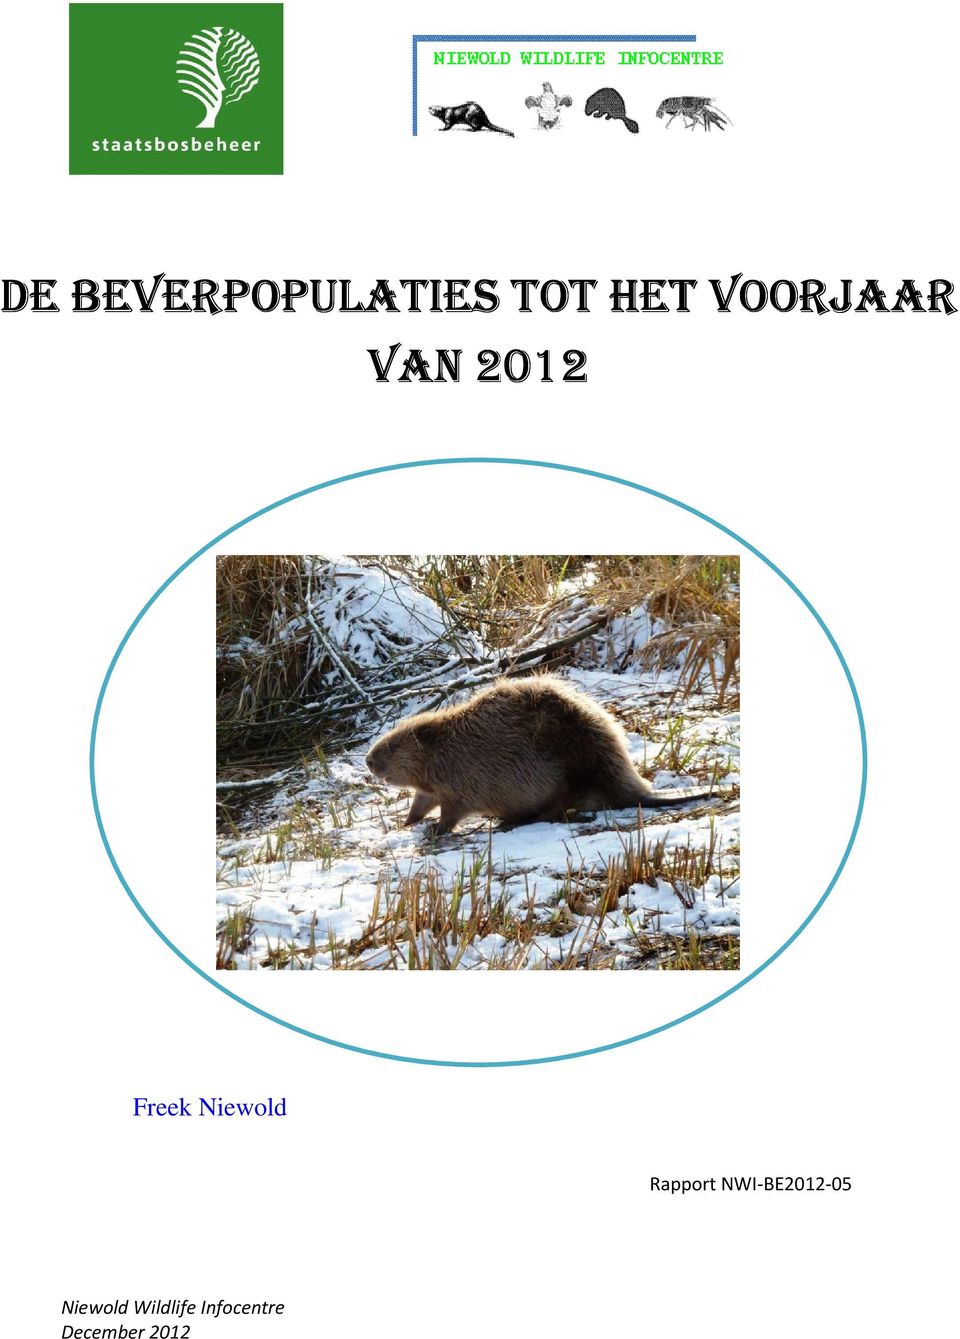 Niewold Rapport NWI-BE2012-05